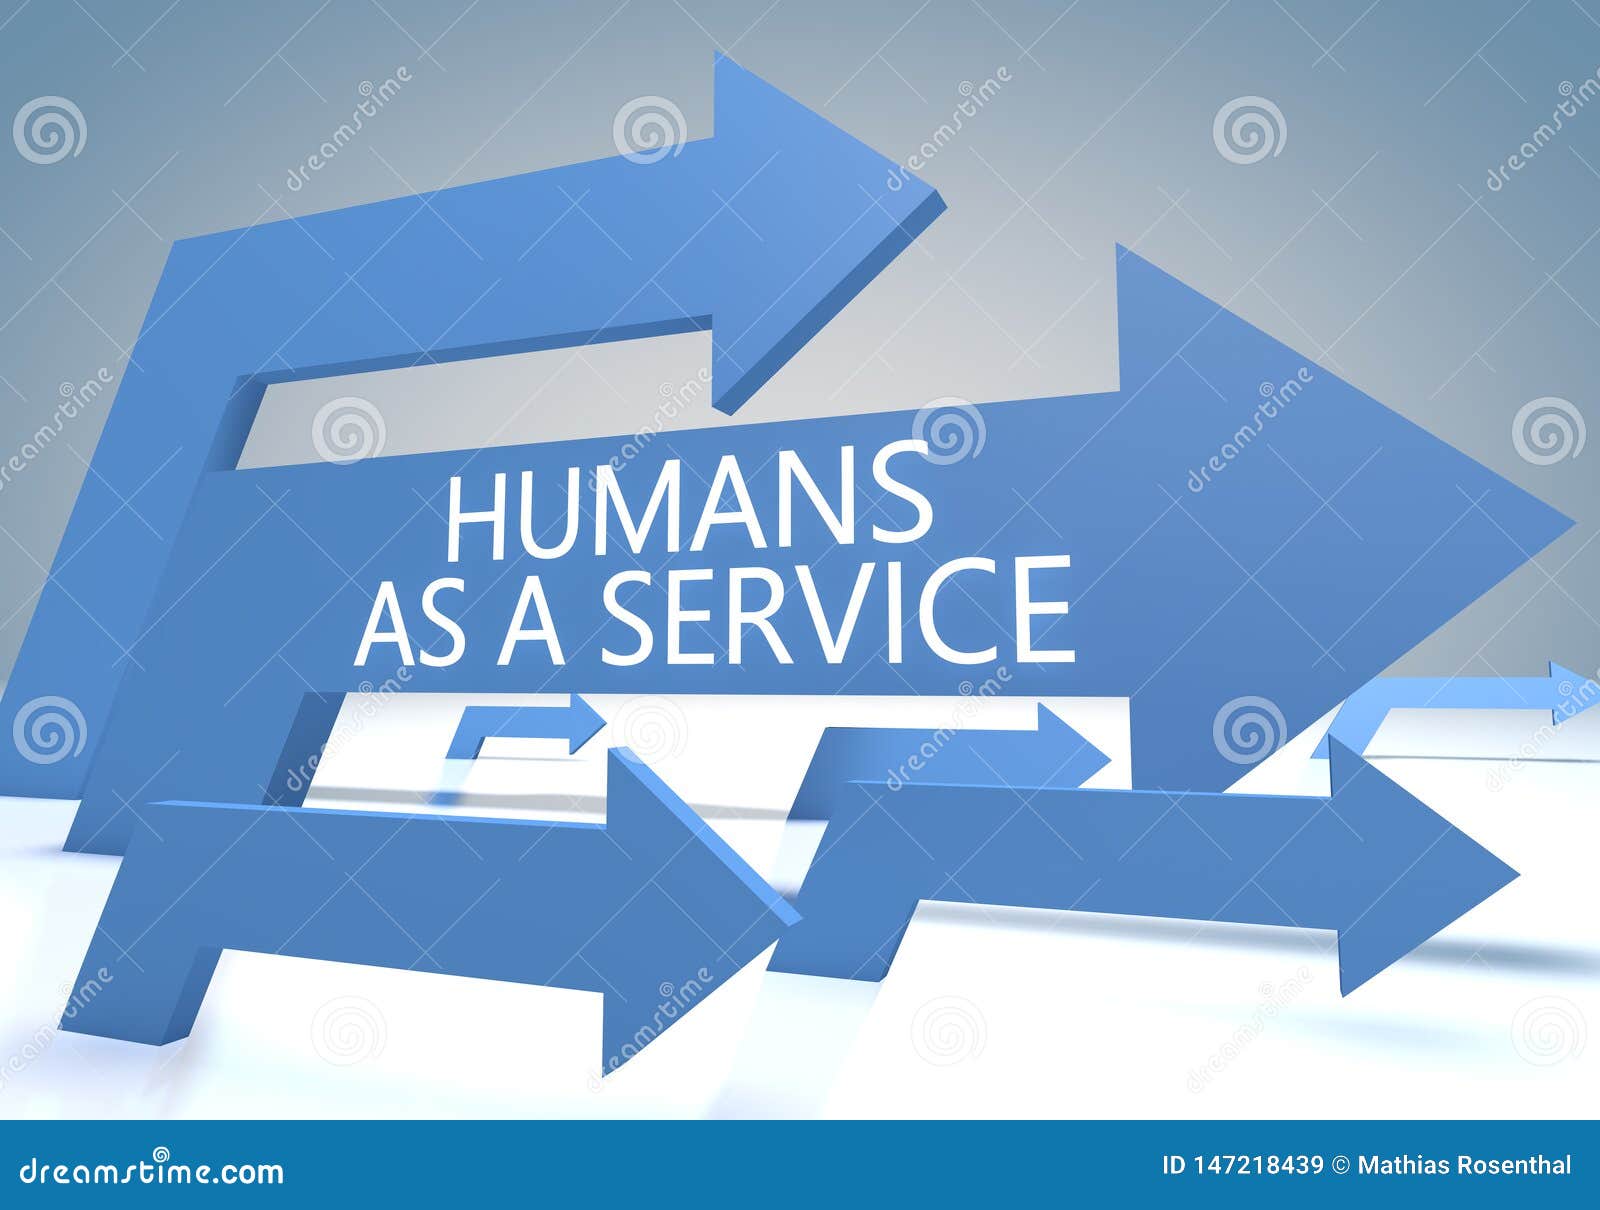 humans as a service